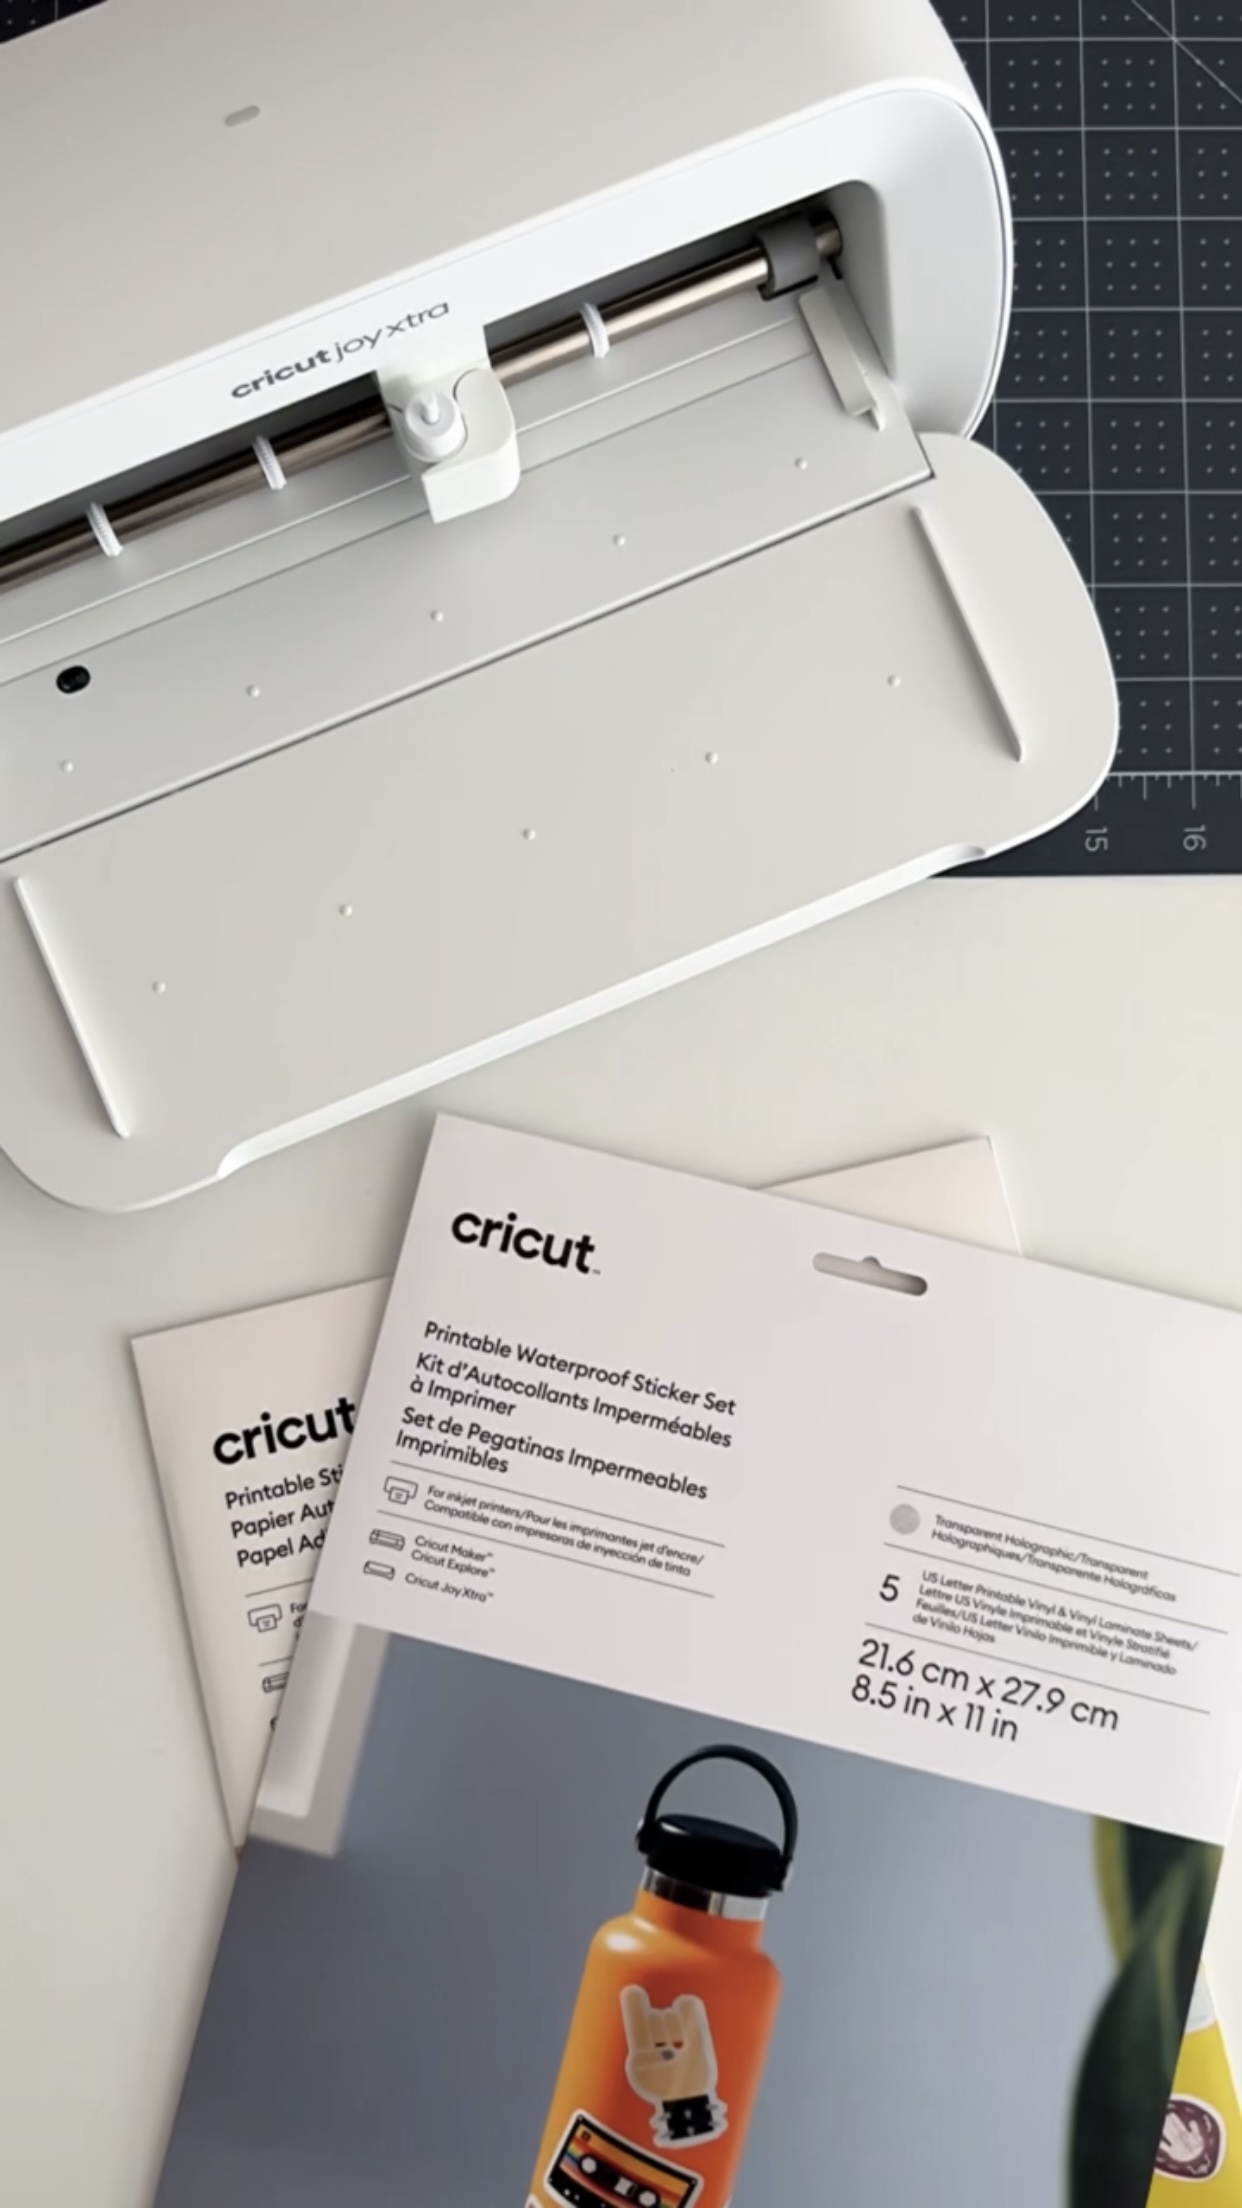 What Projects Can I Make With The Cricut Joy? ⋆ The Quiet Grove